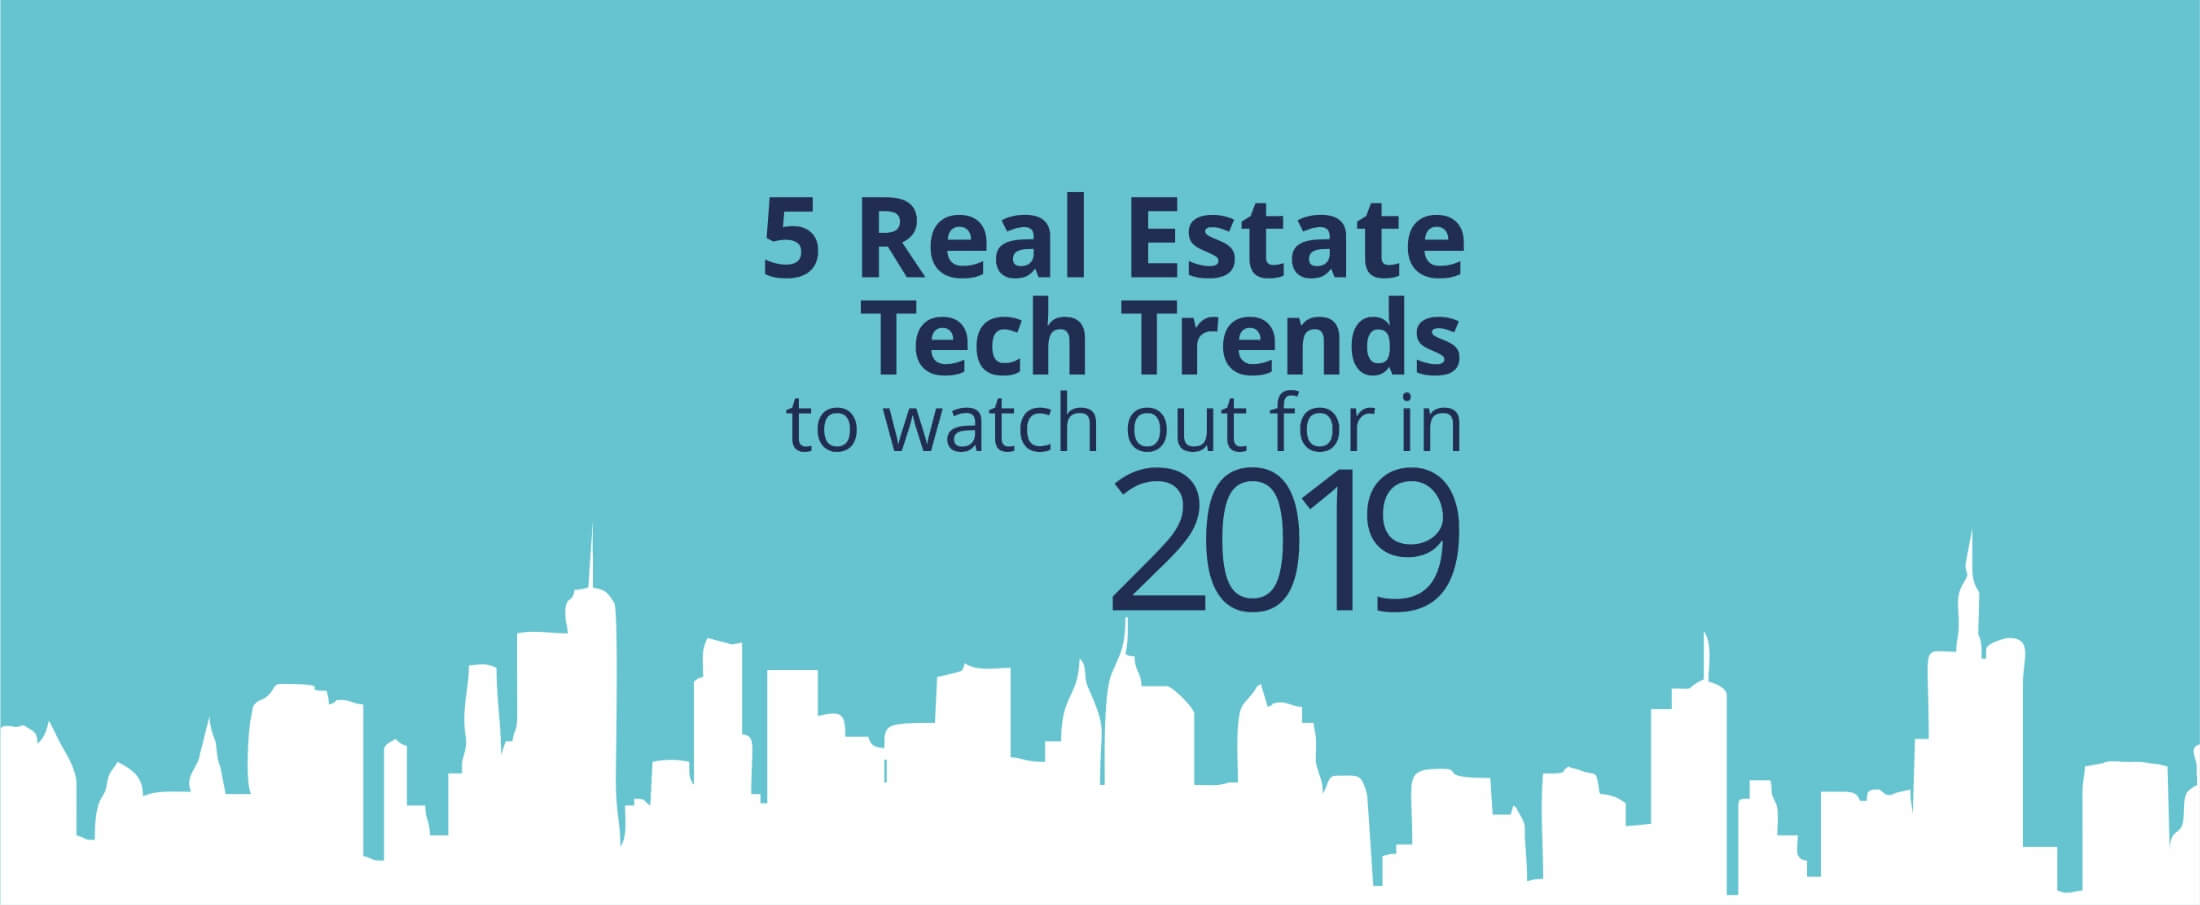 5 Real Estate Tech Trends